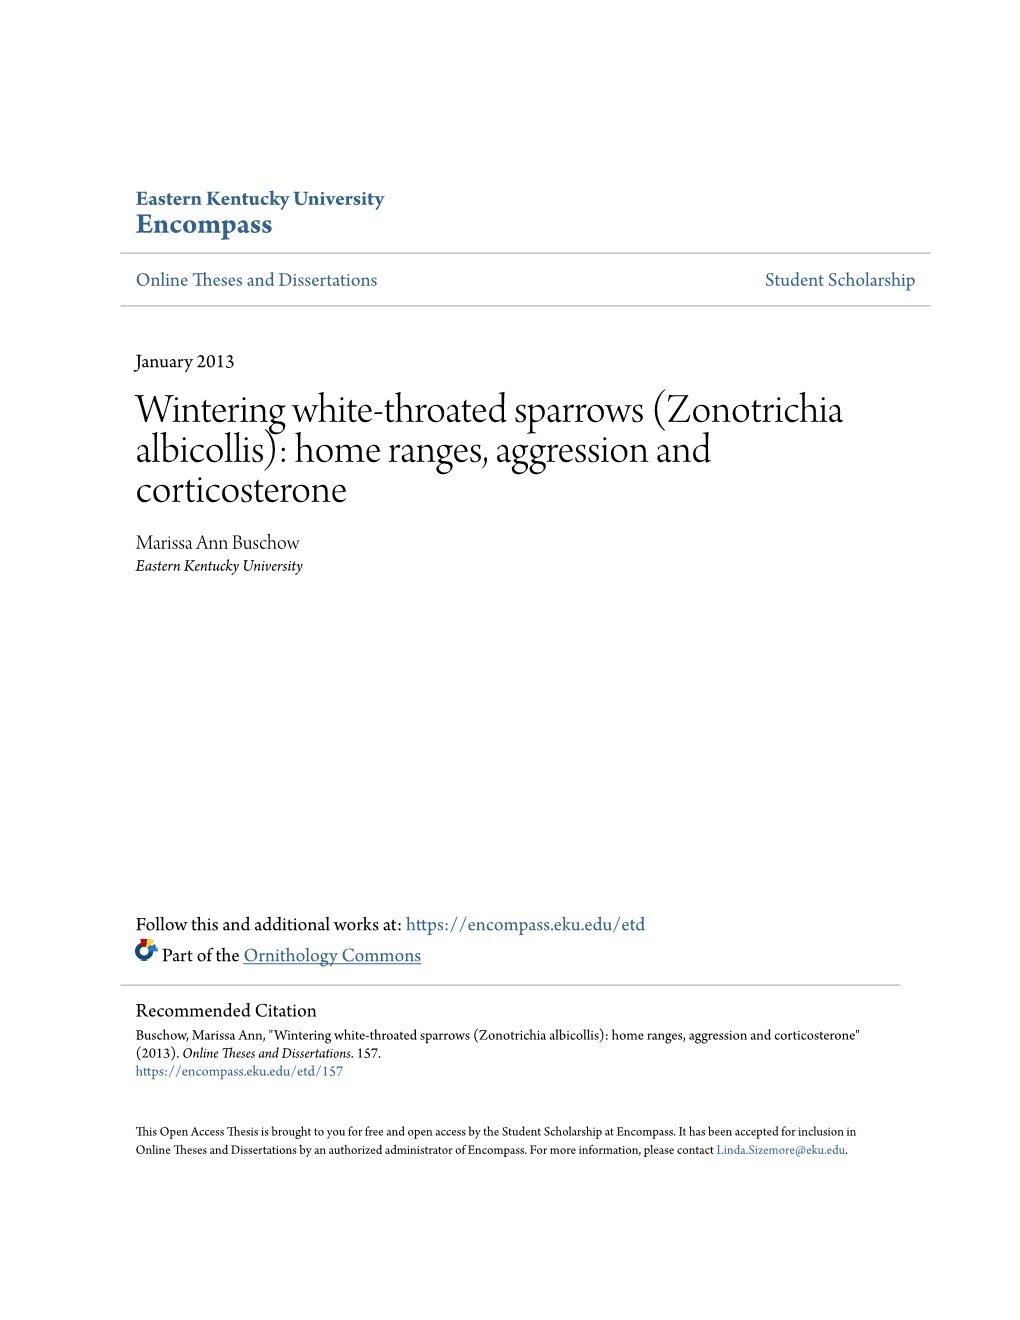 Wintering White-Throated Sparrows (Zonotrichia Albicollis): Home Ranges, Aggression and Corticosterone Marissa Ann Buschow Eastern Kentucky University